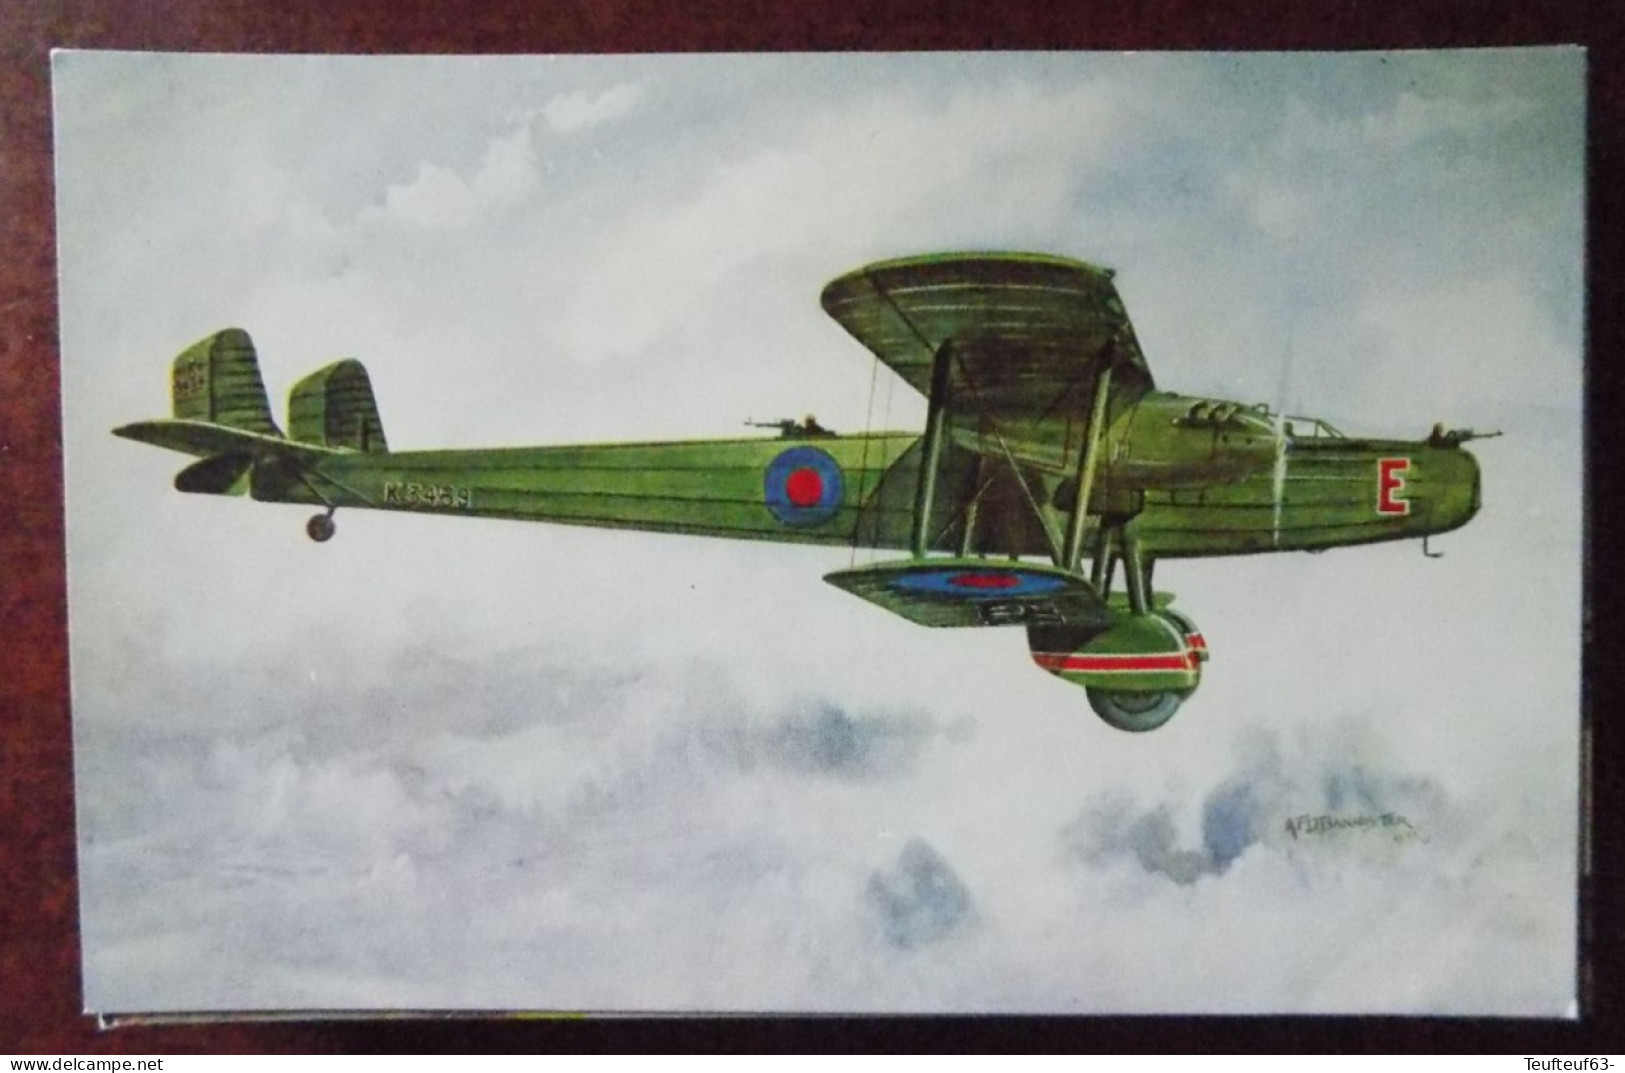 Cpa Handley Page " Heyford " - Long Range Night Bomber  - Ill. Bannister - 1919-1938: Entre Guerres